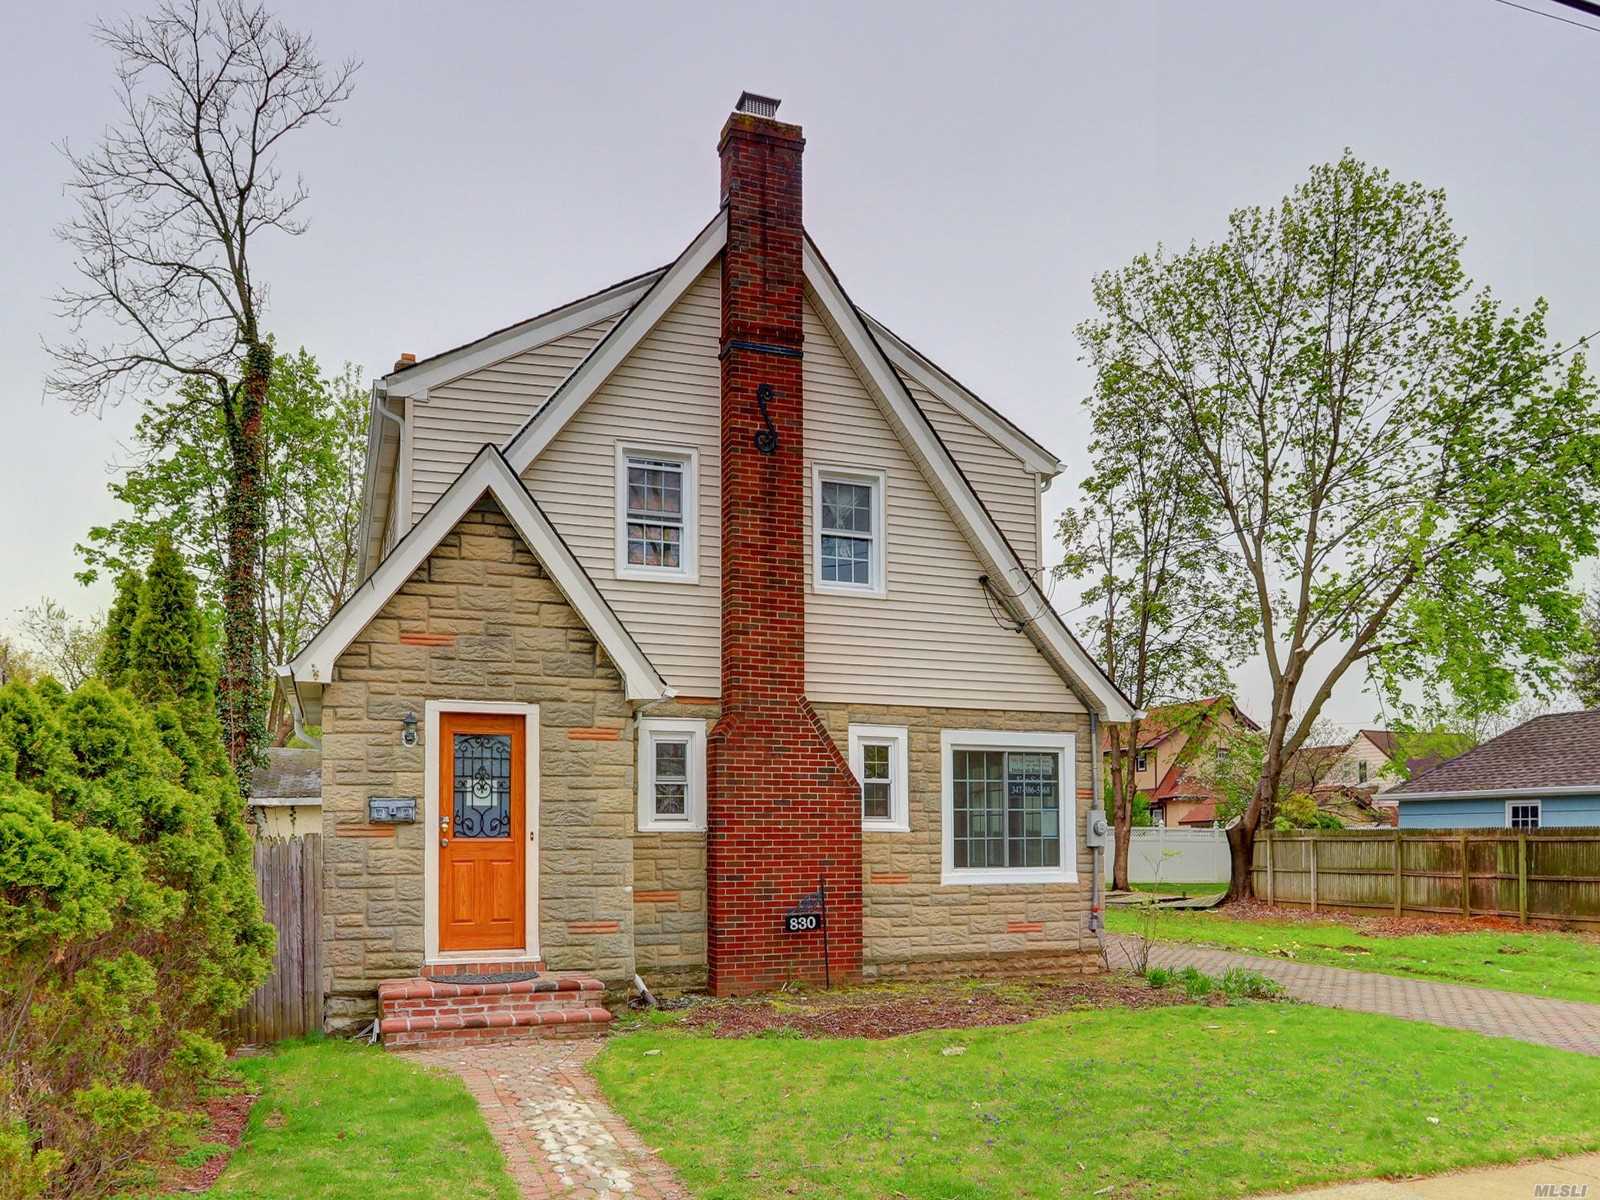 Beautifully renovated home in the heart of Baldwin. Beautiful hardwood flooring throughout, walking distance to high school, quiet neighborhood, stainless steel appliances, kitchen with granite countertops with breakfast nook. Much more. Call to see this home today!